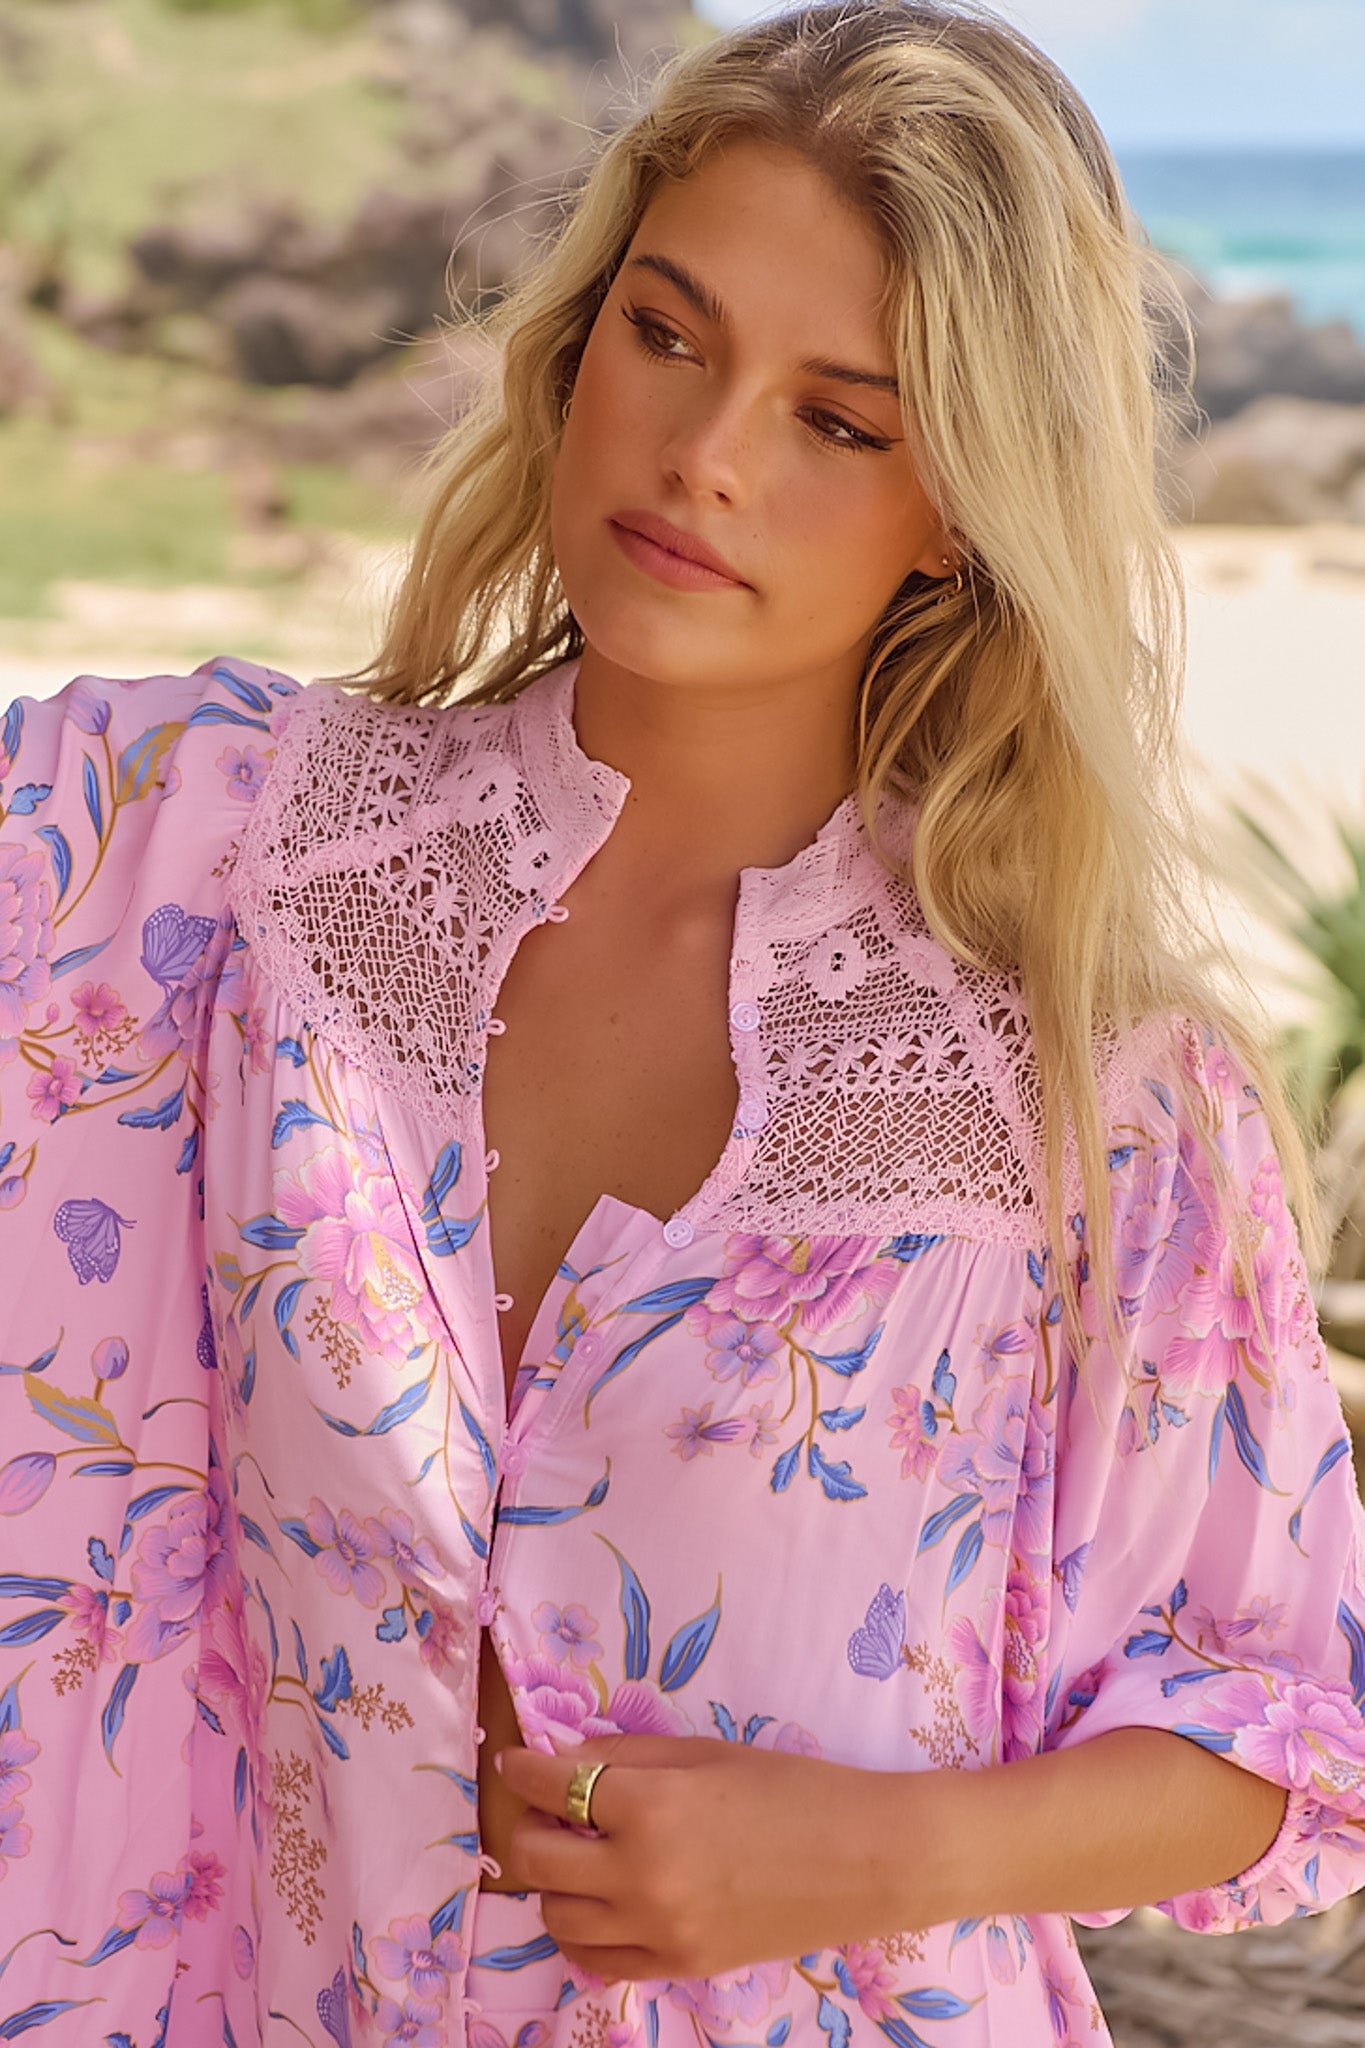 JAASE - Florence Blouse: Lace Shoulders Button Down Blouse in Enchanted Blooms Print